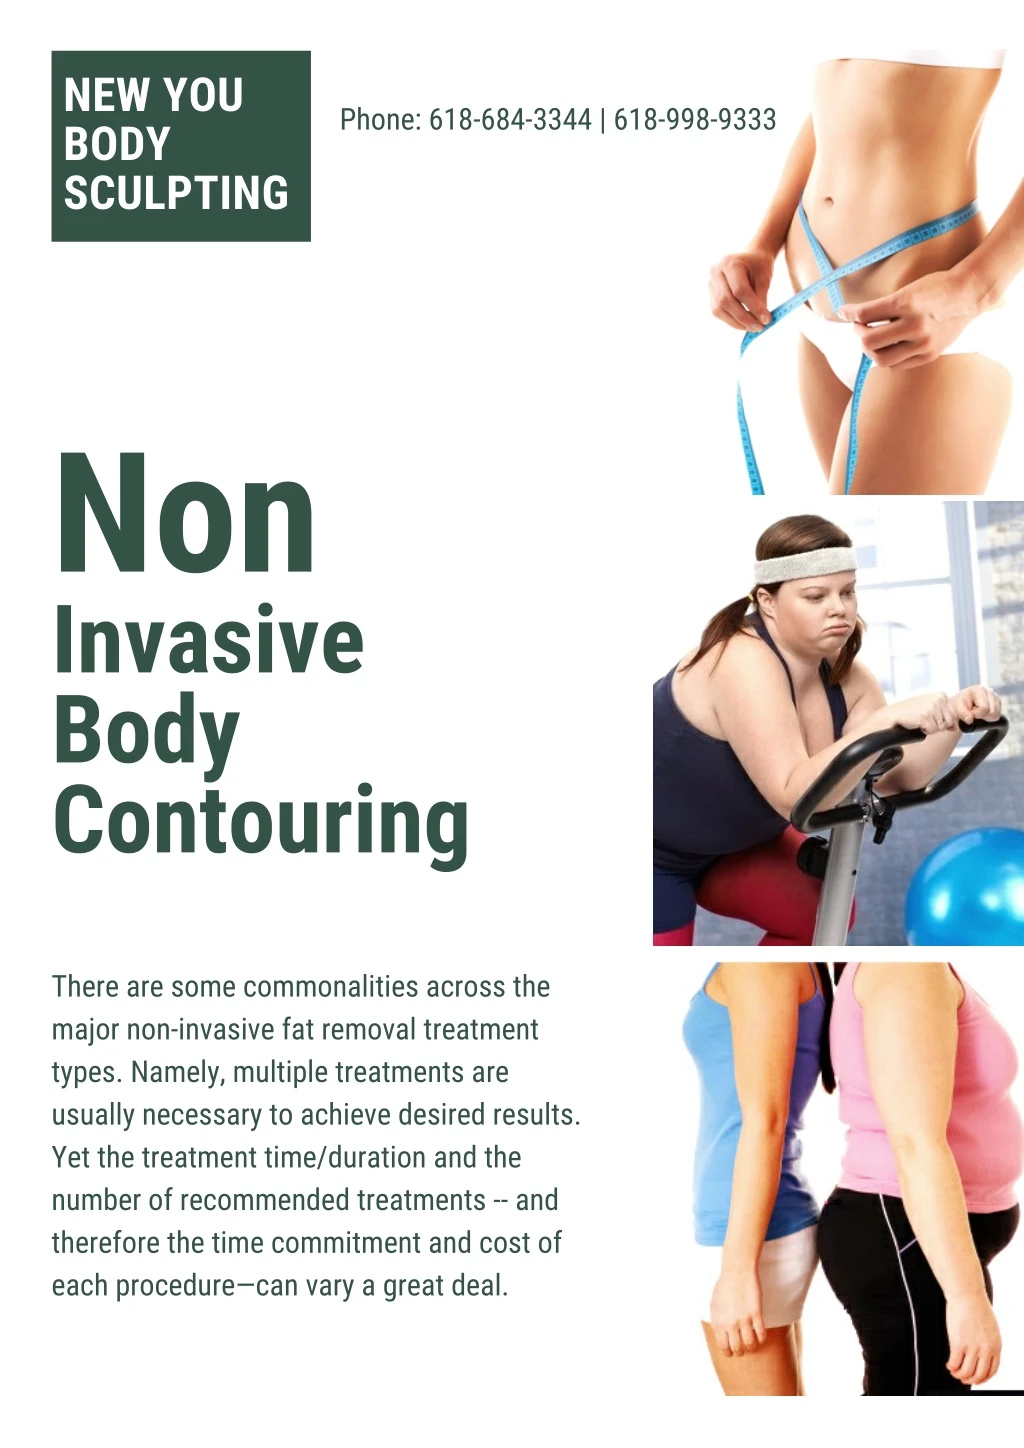 new you body sculpting